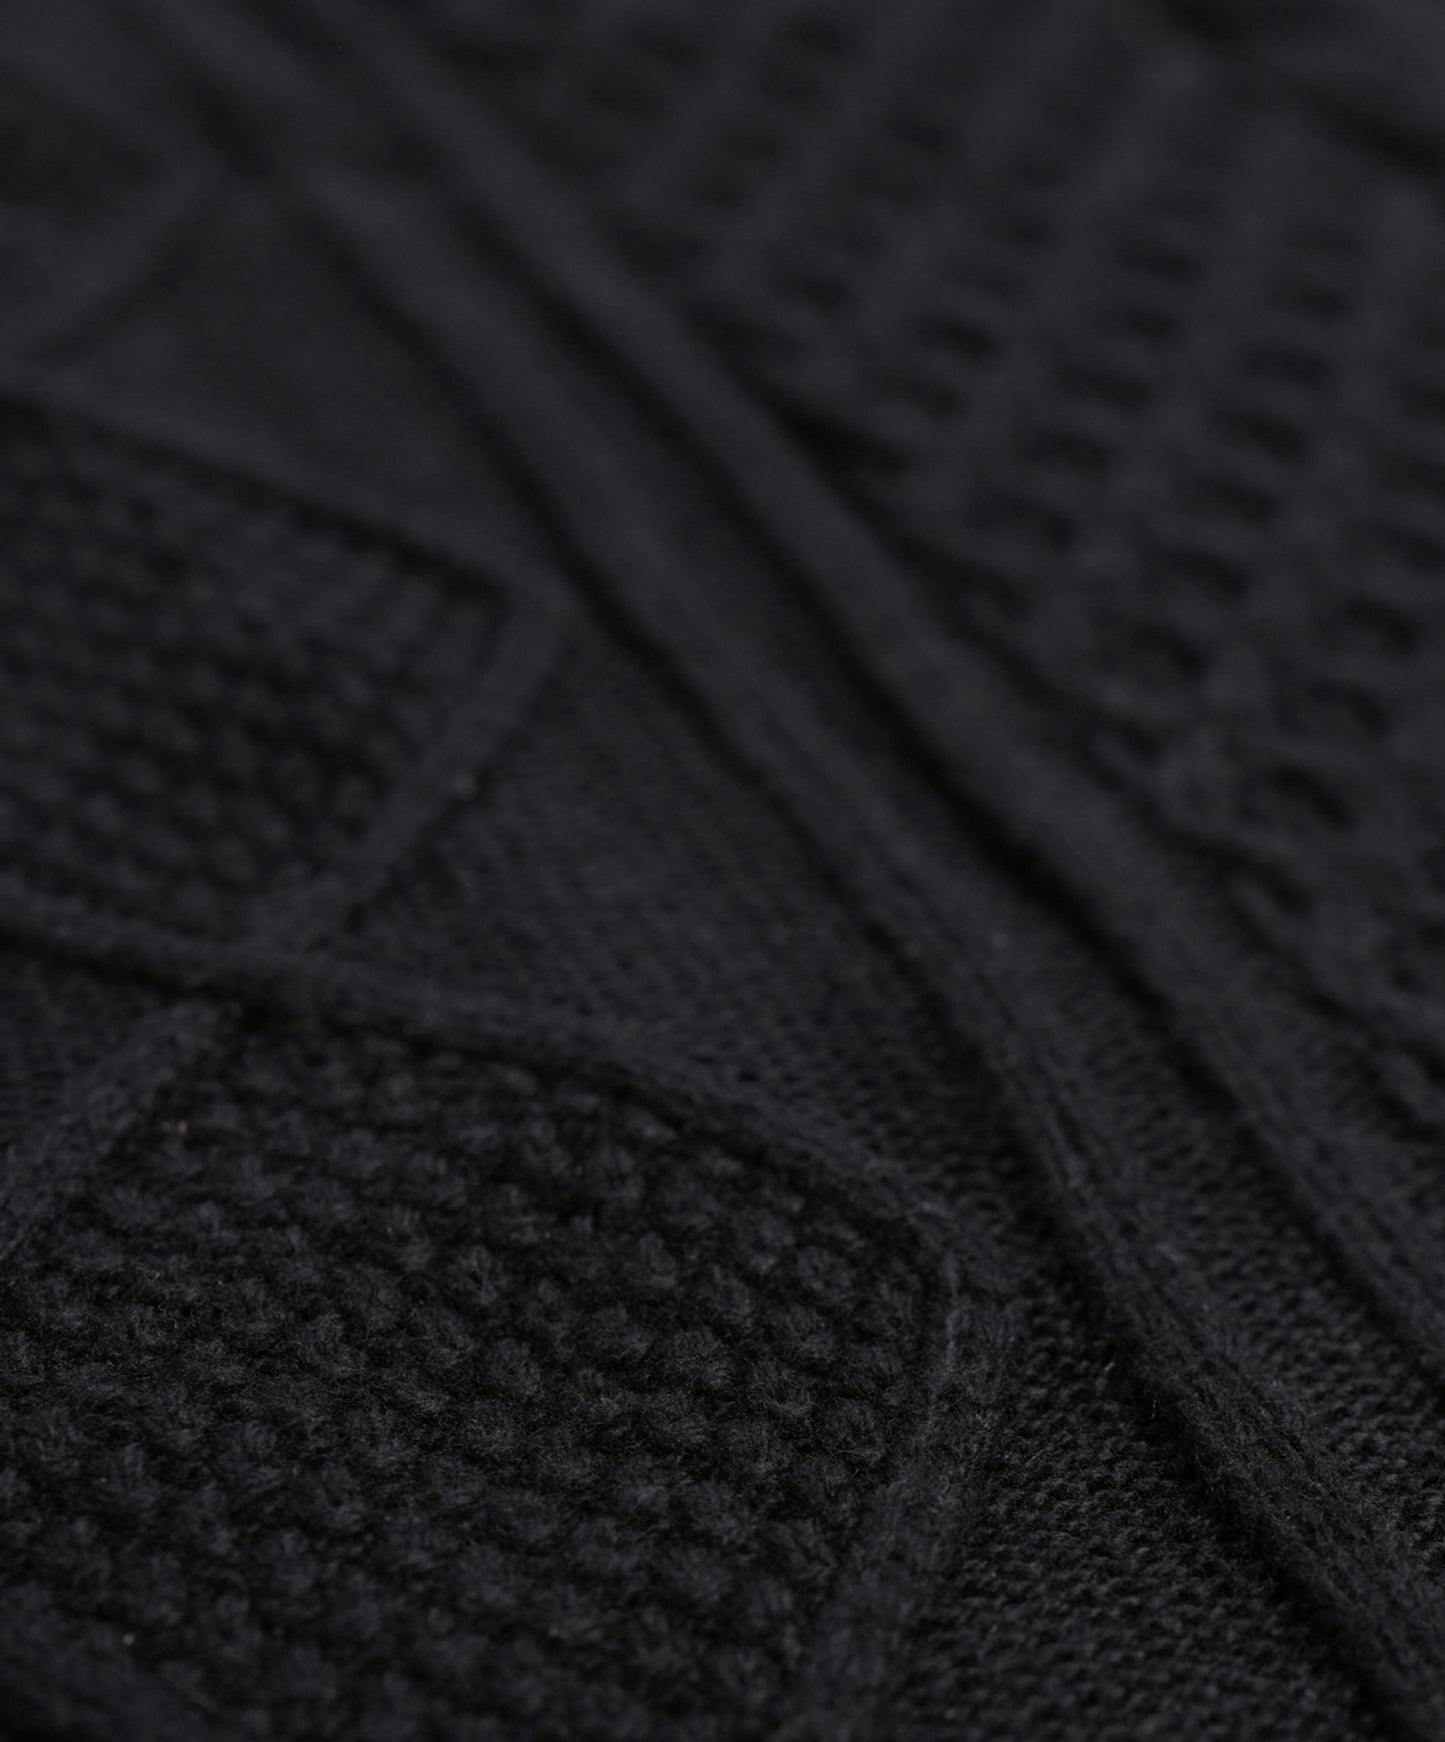 Recycled Aran Cable Poncho in color Black